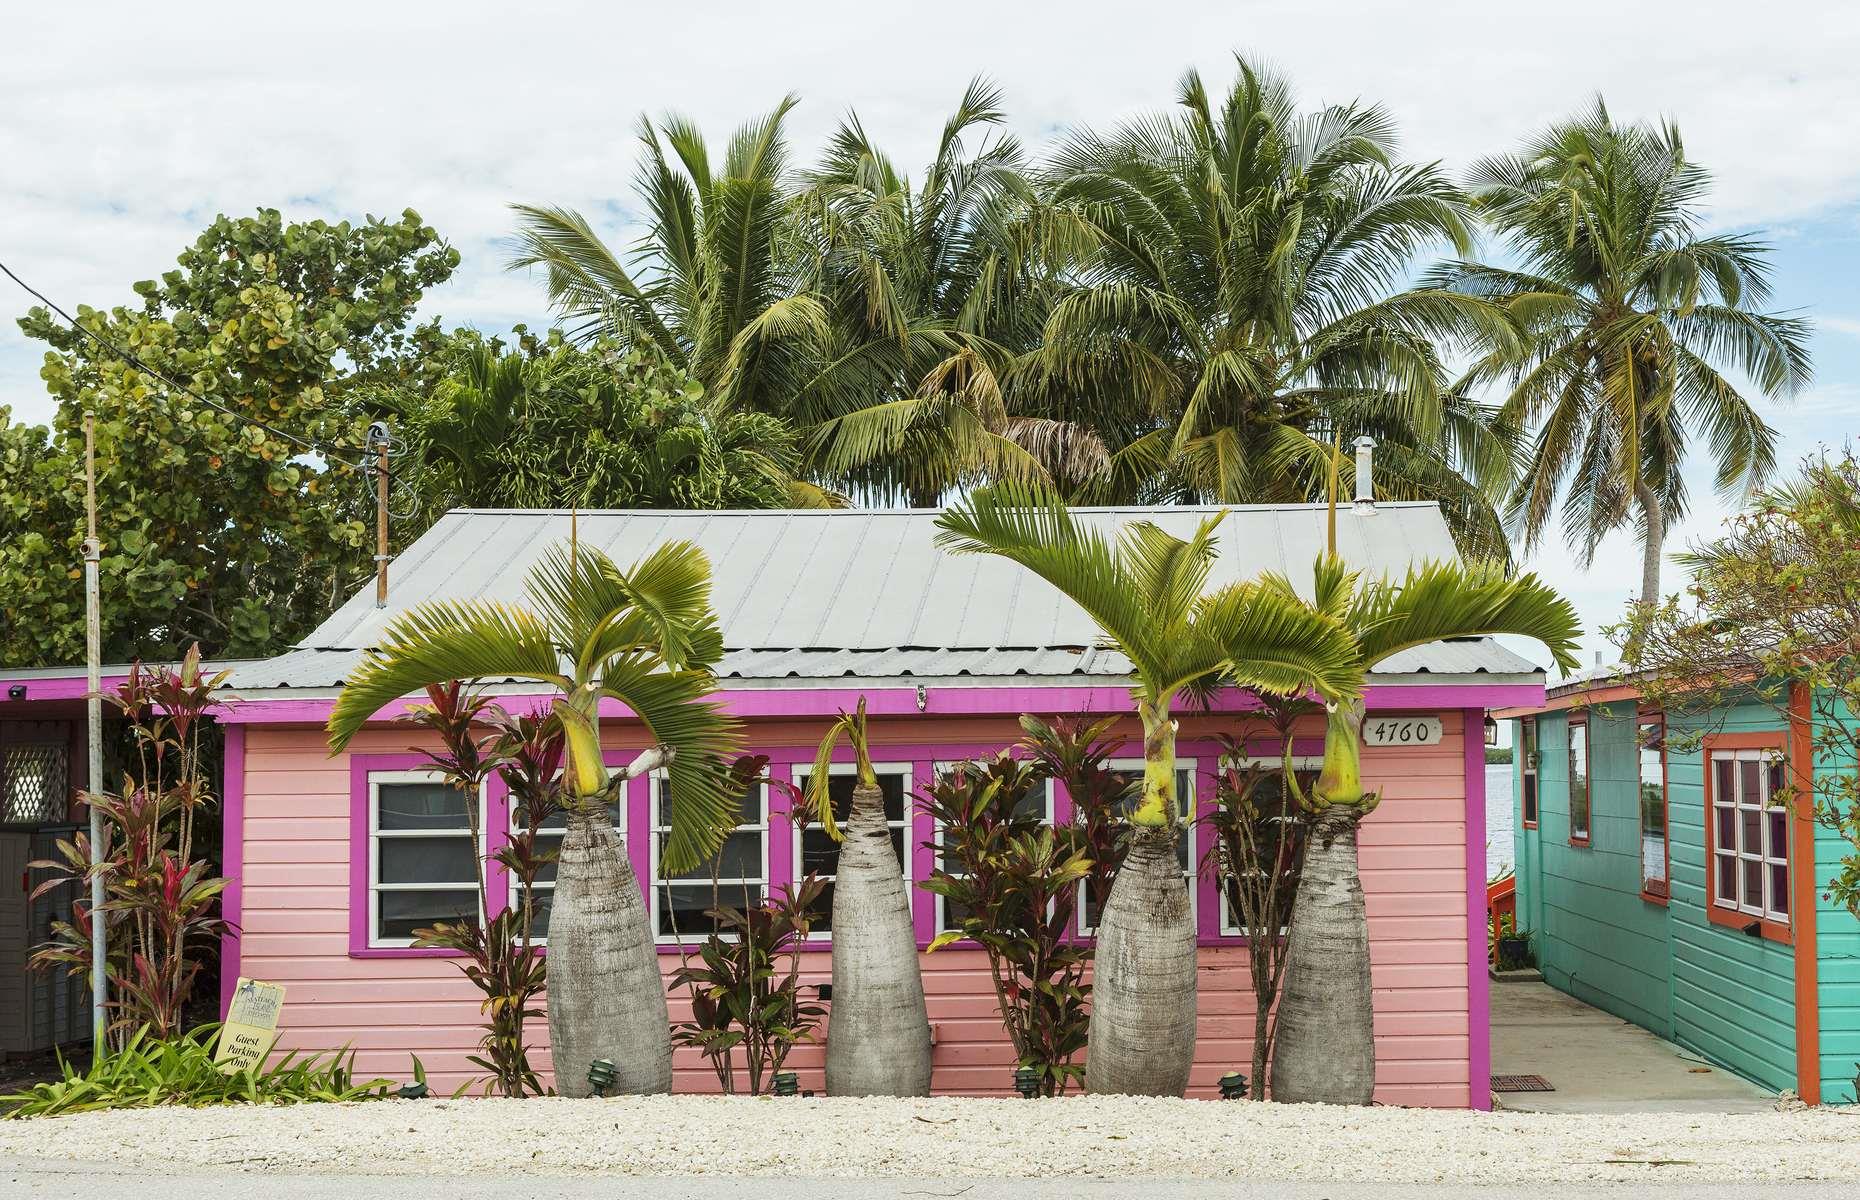 <p>Colorful beachfront cabins such as this one are a common sight in Matlacha. Located on a small spit off the coast of Fort Myers, the hamlet is painted in a rainbow of unashamedly bright hues. It started life as a fishing village but in the 1990s, when it became clear that the dwindling fishing industry wasn’t enough to support all residents, locals took to the paint palette to revive the town and attract tourists. Inside these vivid buildings you’ll find art galleries, beach bars, independent restaurants and more.</p>